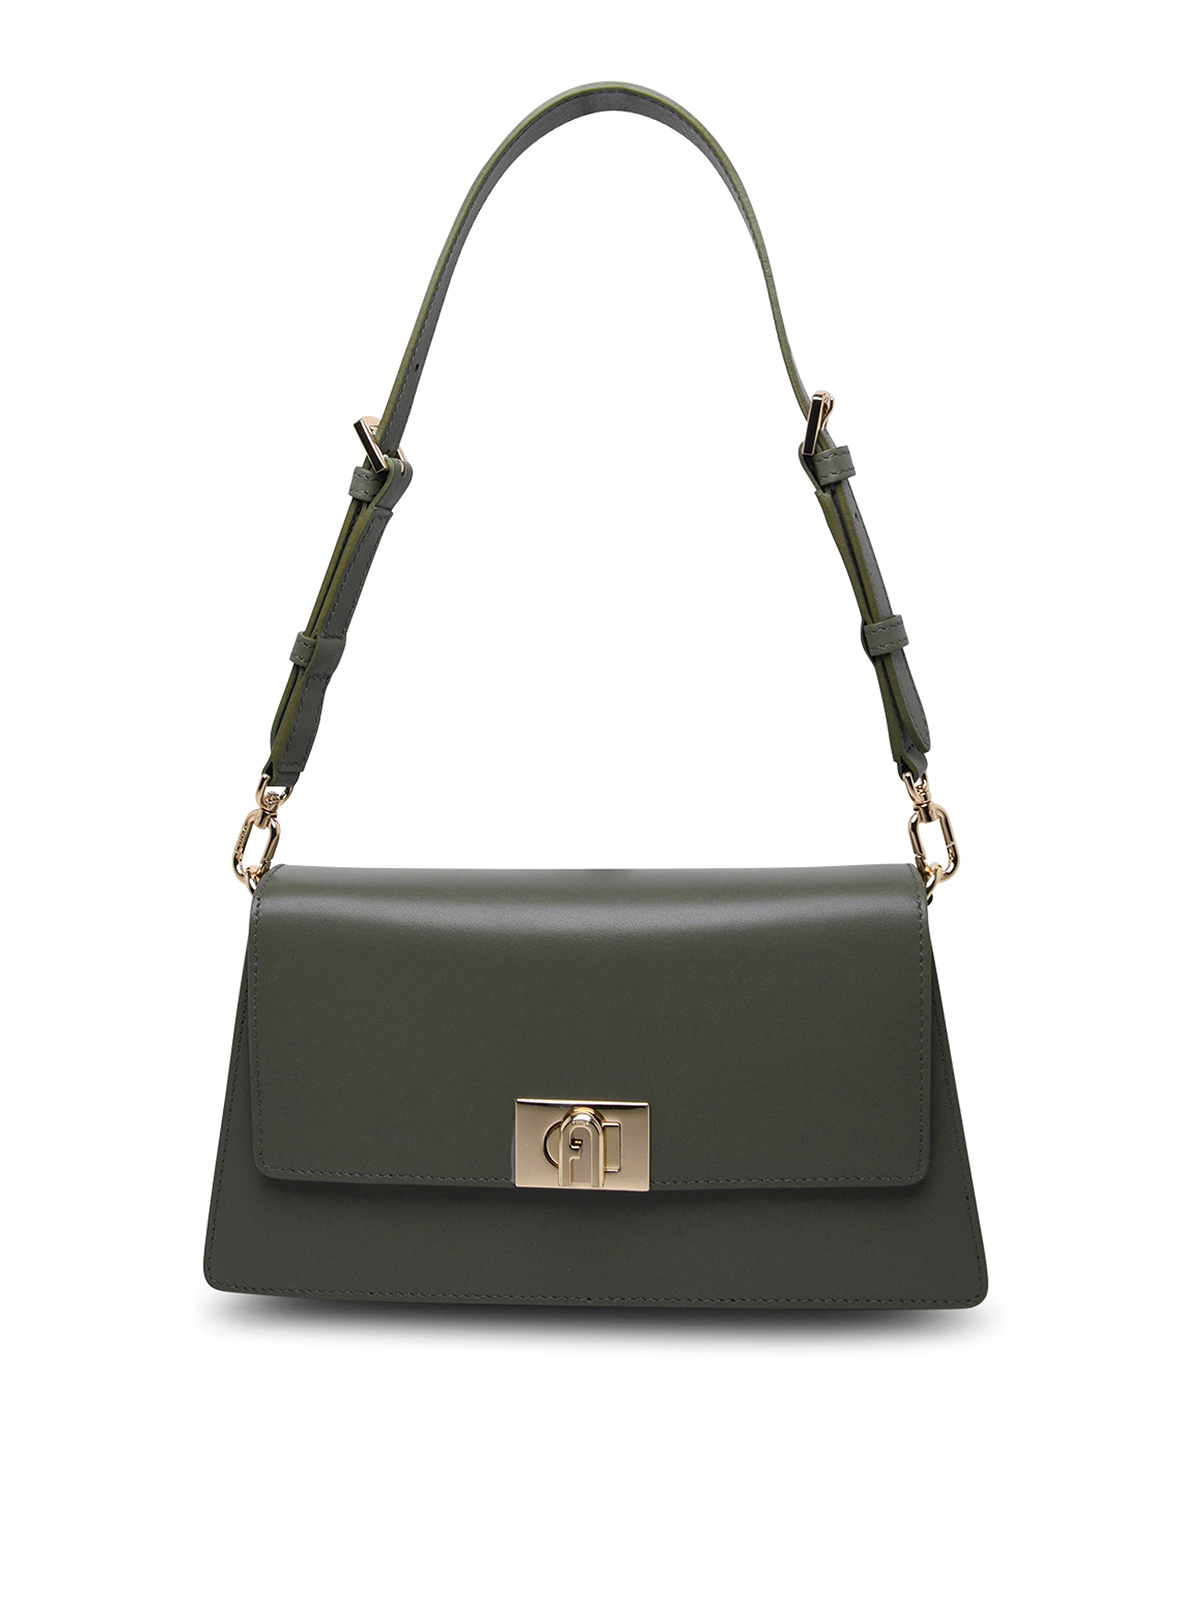 Zoe bag in green leather